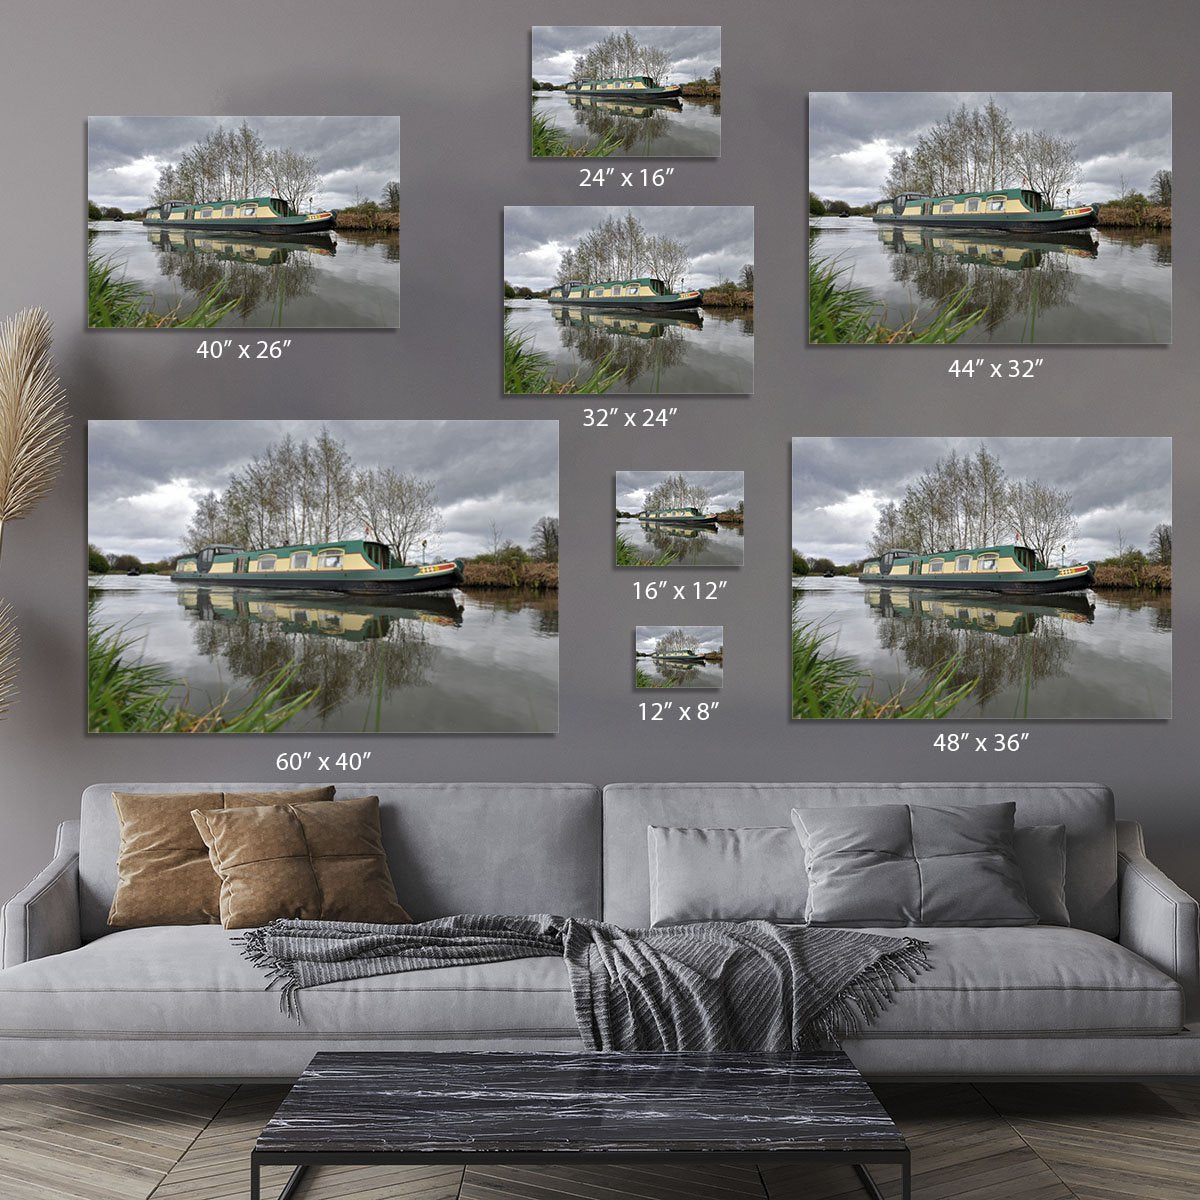 Bridgewater Canal Canvas Print or Poster